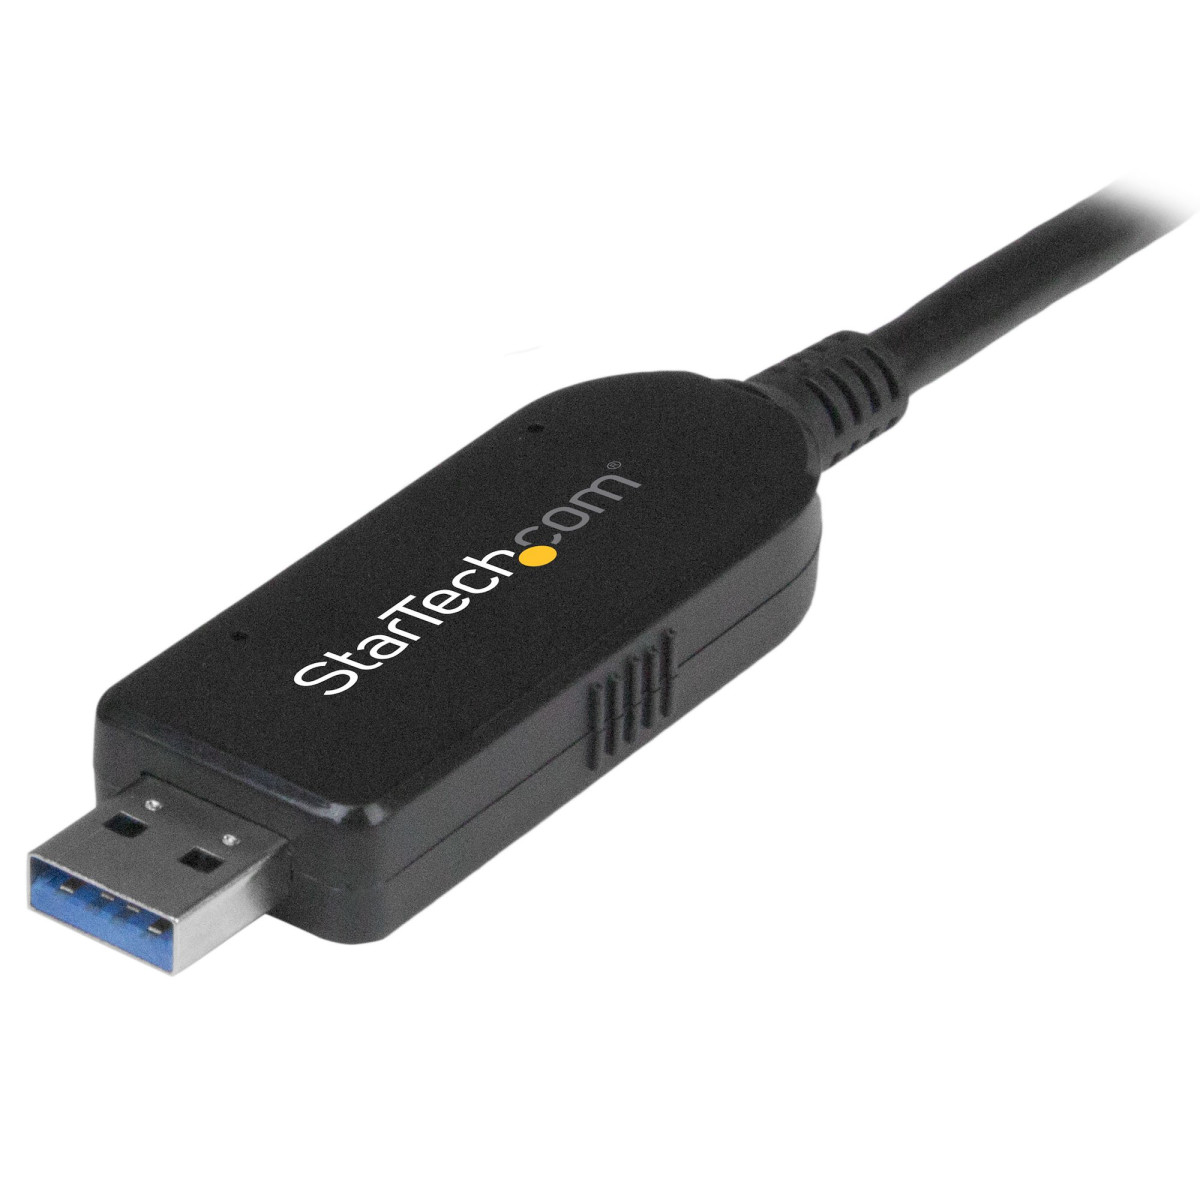 USB 3.0 Data Transfer Cable